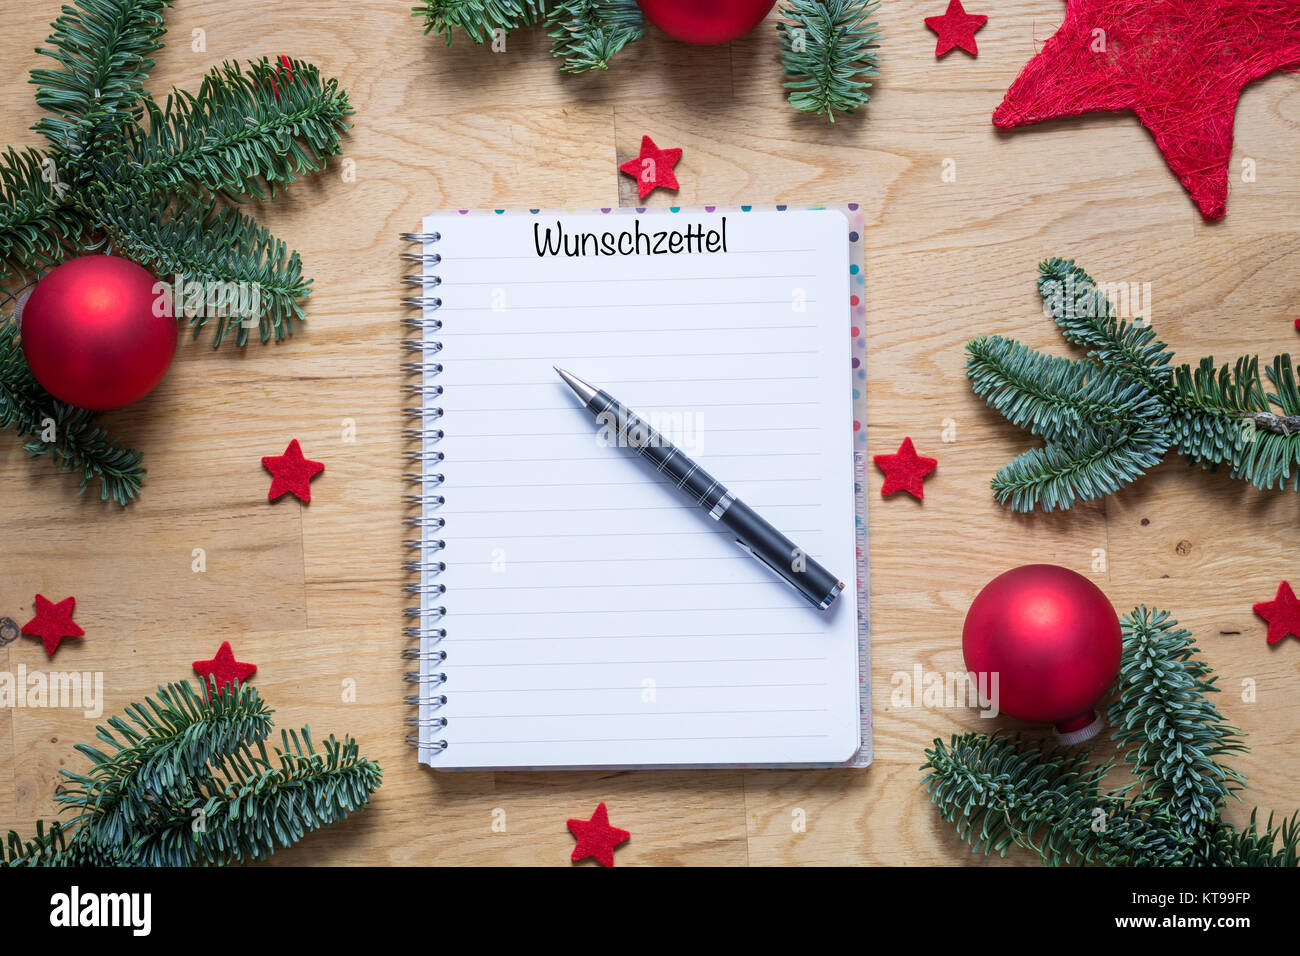 Wish list for Christmas in German on a notepad with Christmas ...